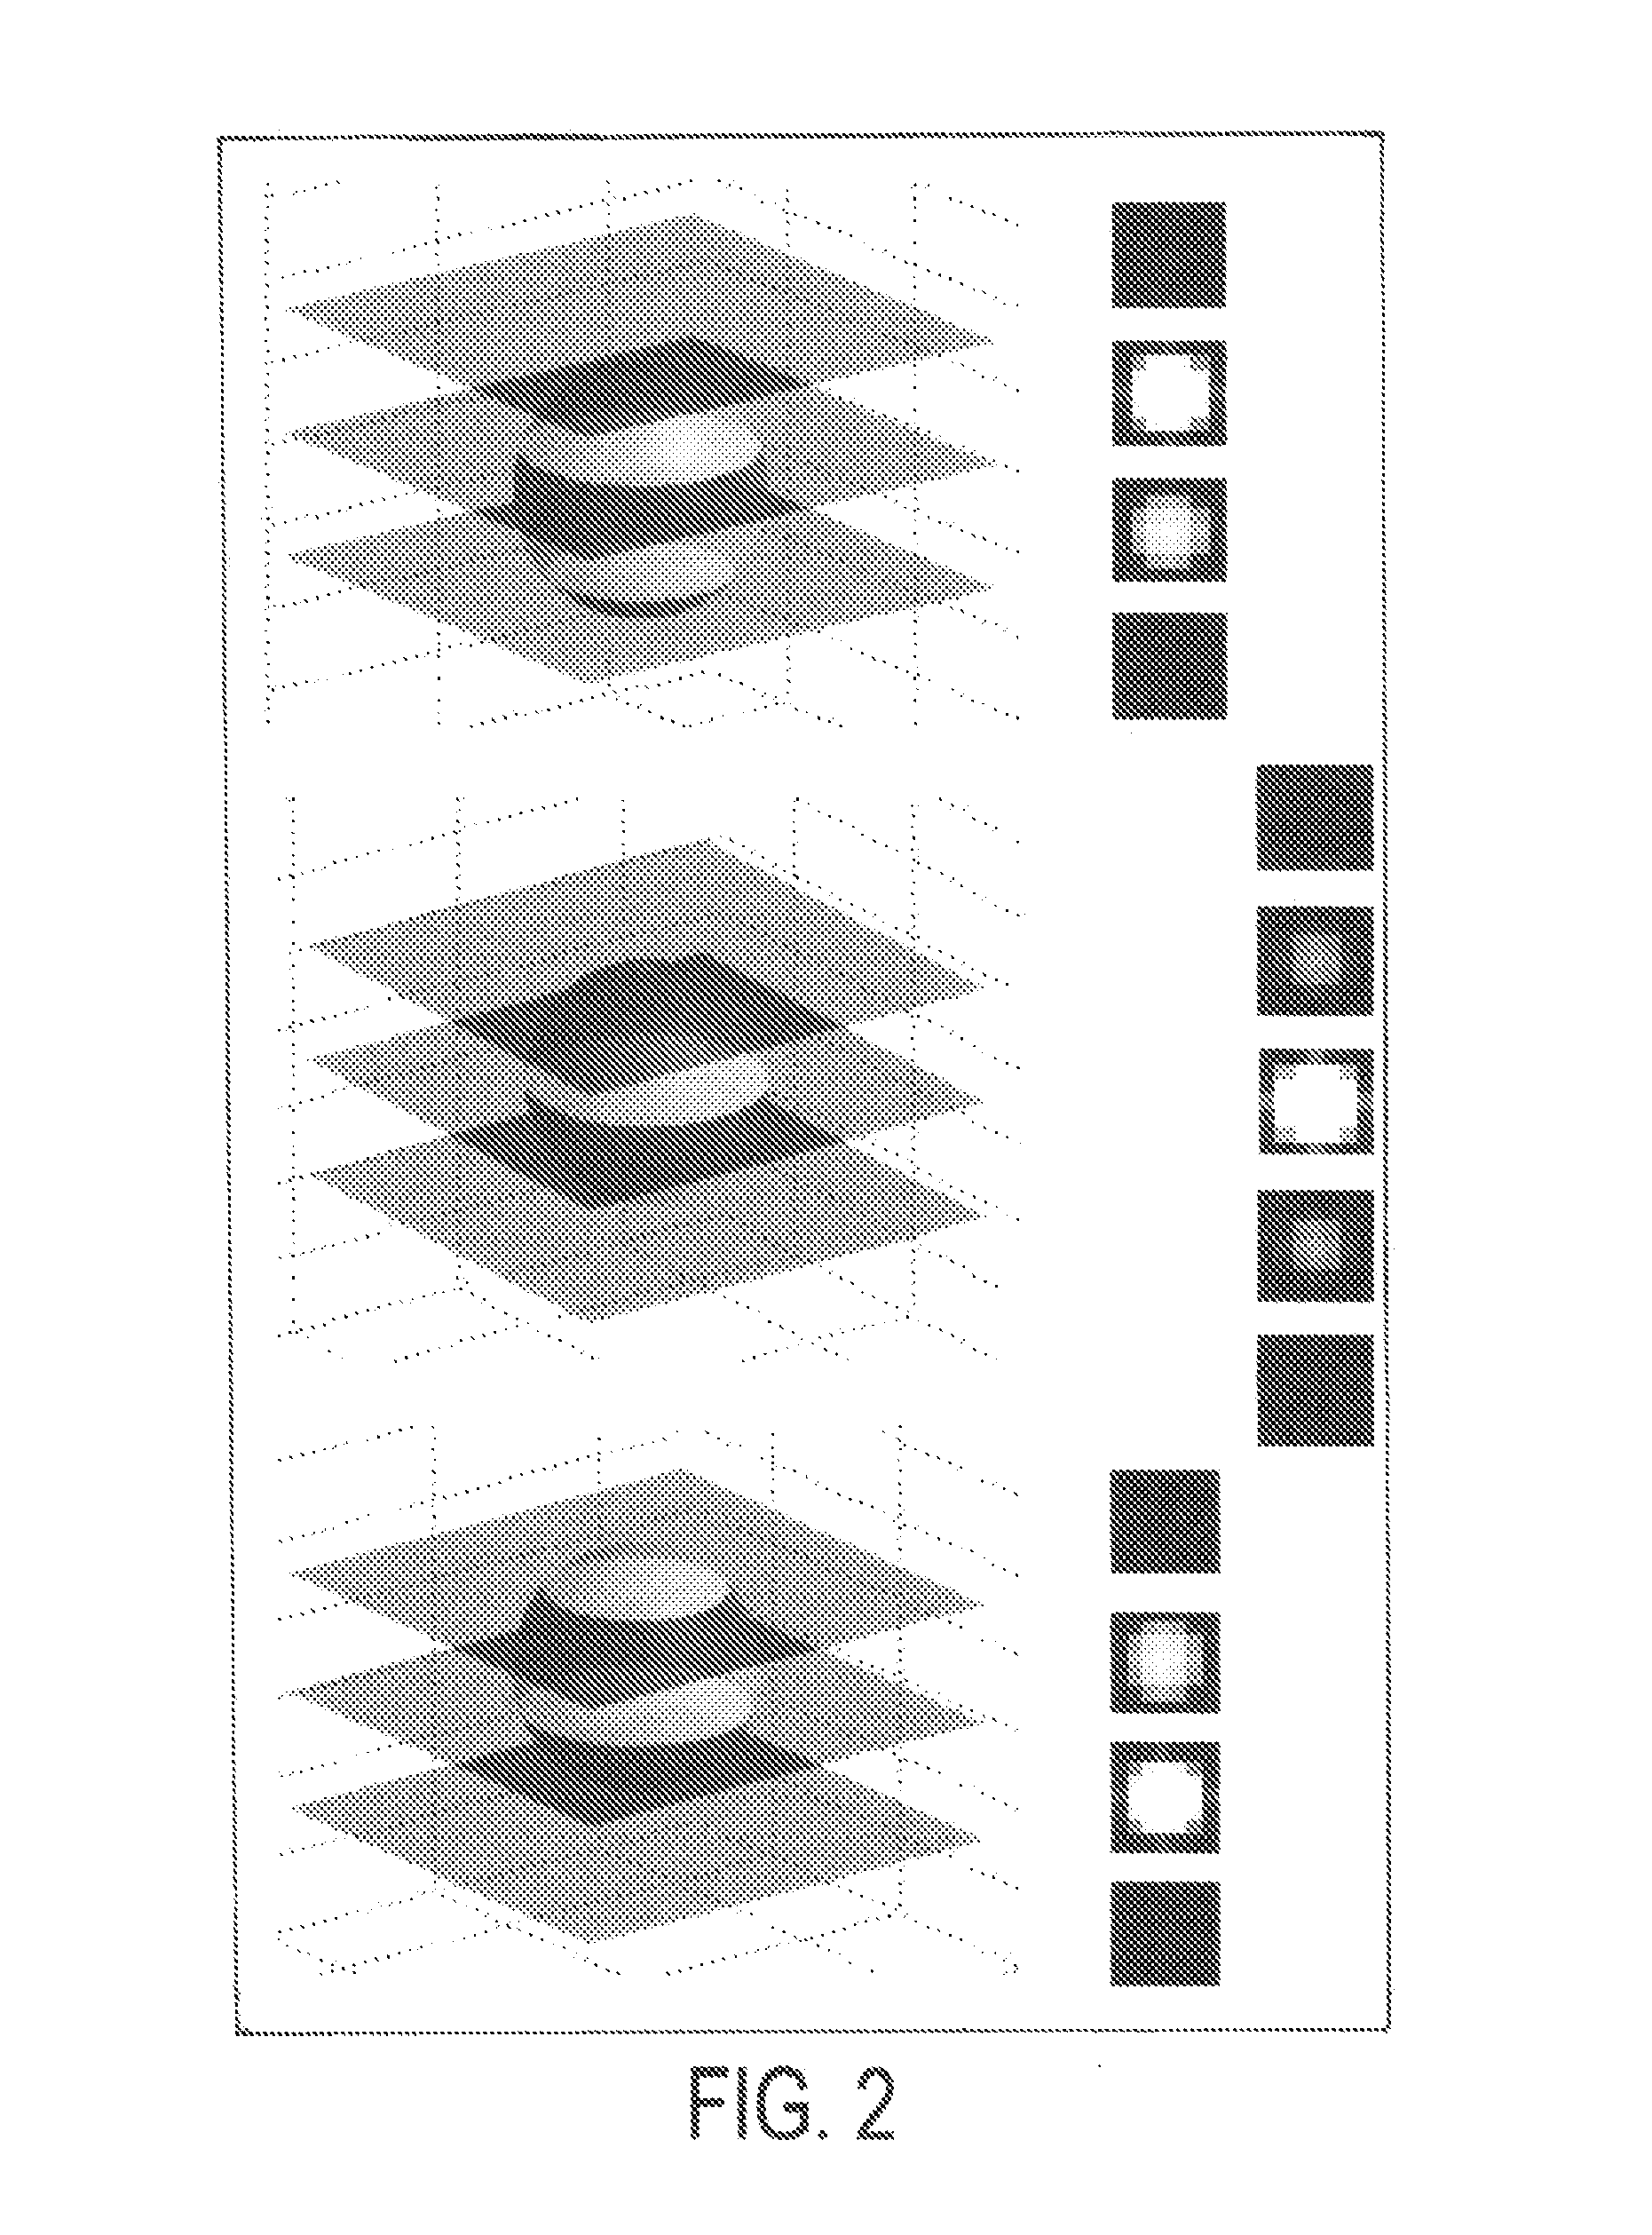 Method and system for detecting lung tumors and nodules